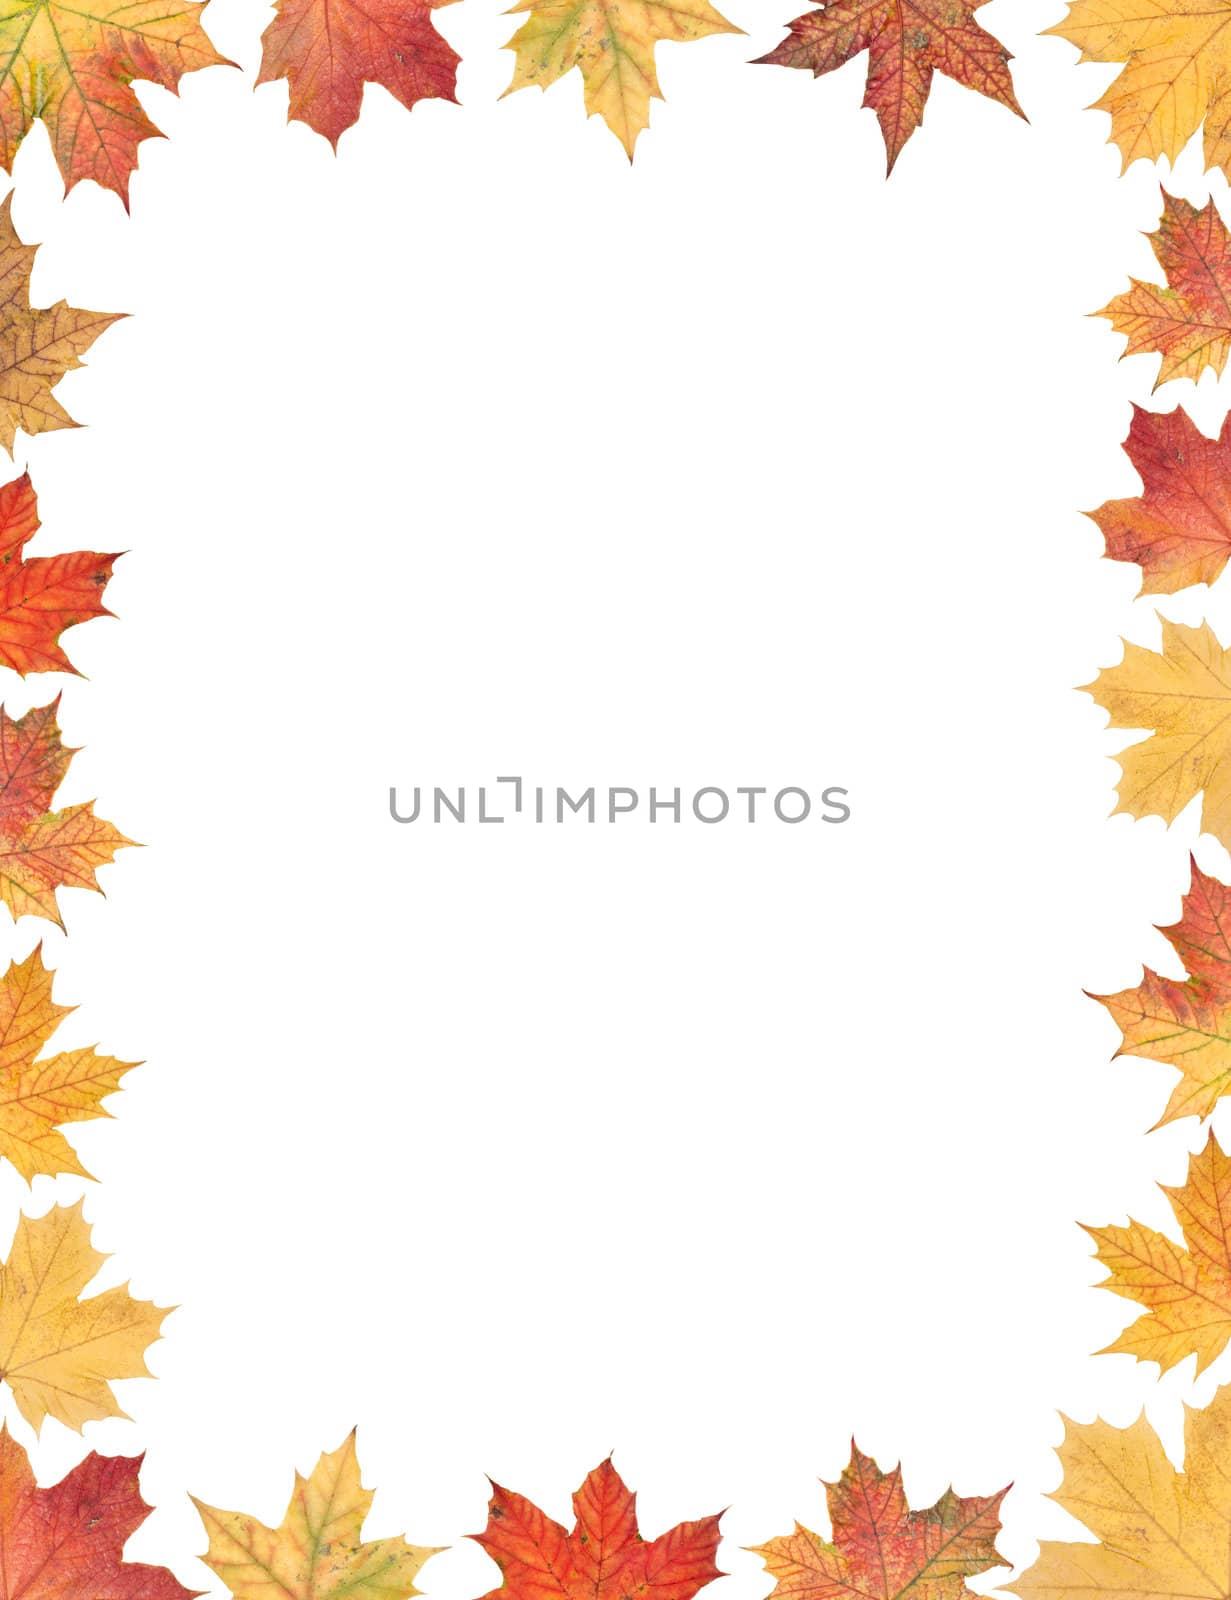 Frame of autumn leafs isolated on white